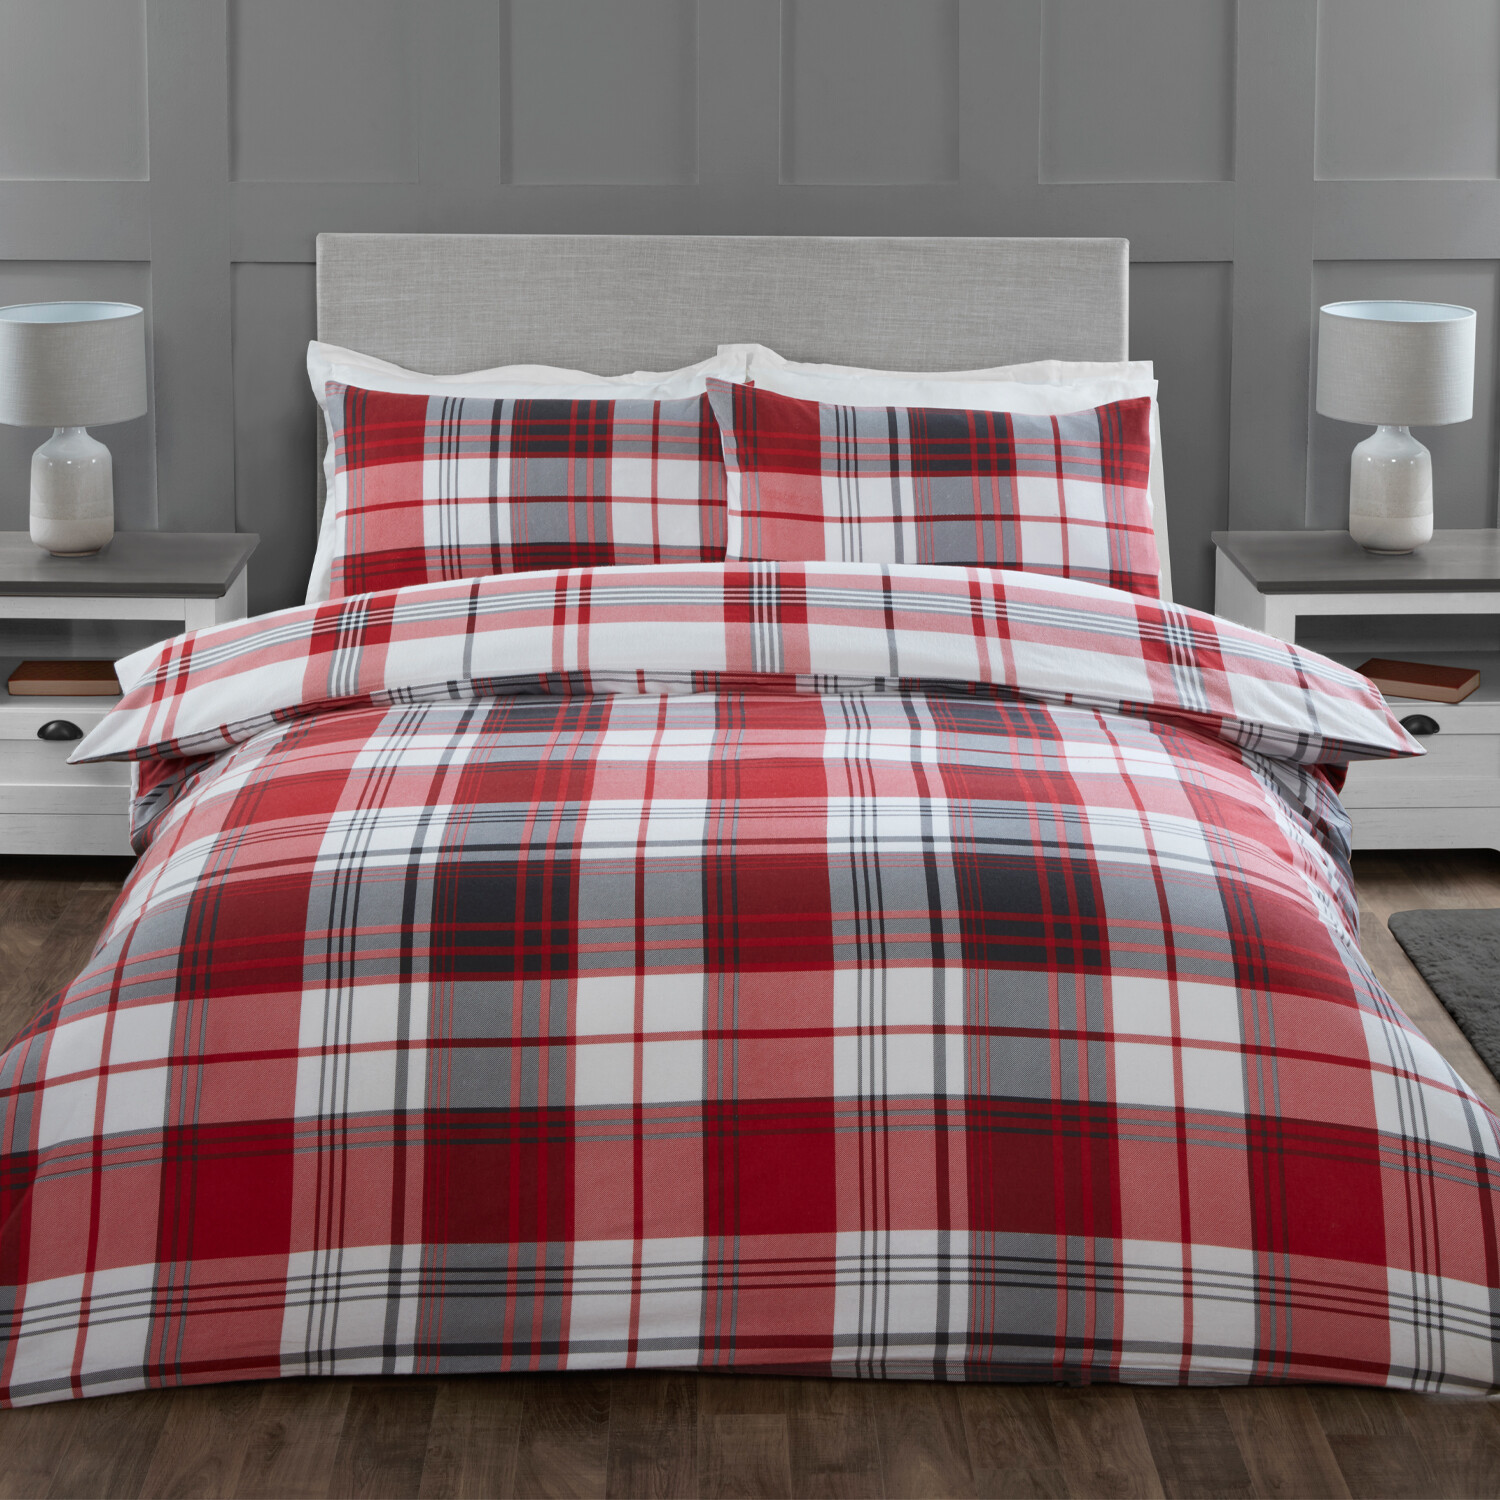 Hamilton Grey Check Duvet Cover and Pillowcase Set - Red / Super King size Image 1